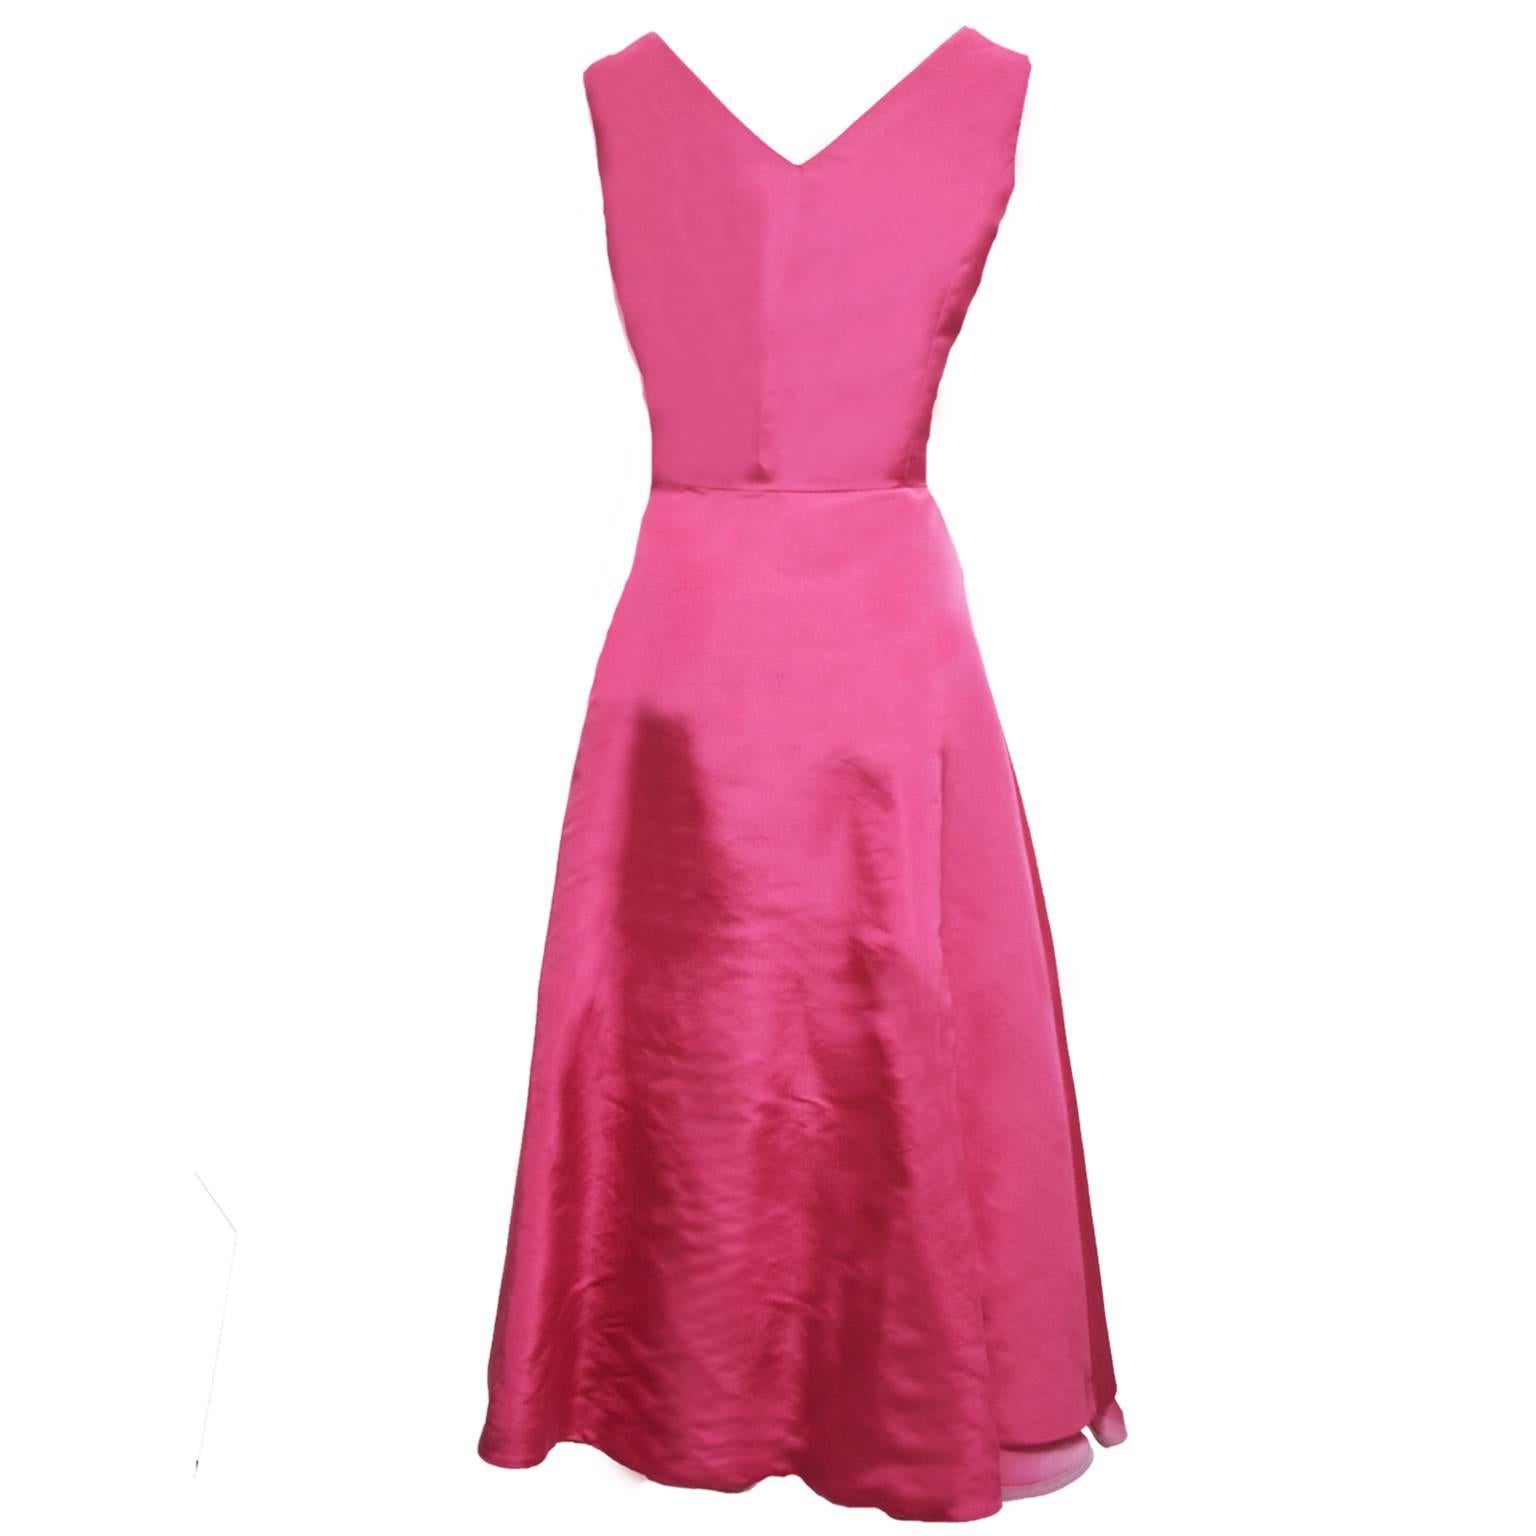 This exquisite dress by Shalini is made from rich taffeta silk, and is a two-toned layered dress in fuchsia and light pink. The neckline is a slight princess cut and the skirting is minimalistic with a basic simplistic ruffle and the end for a high